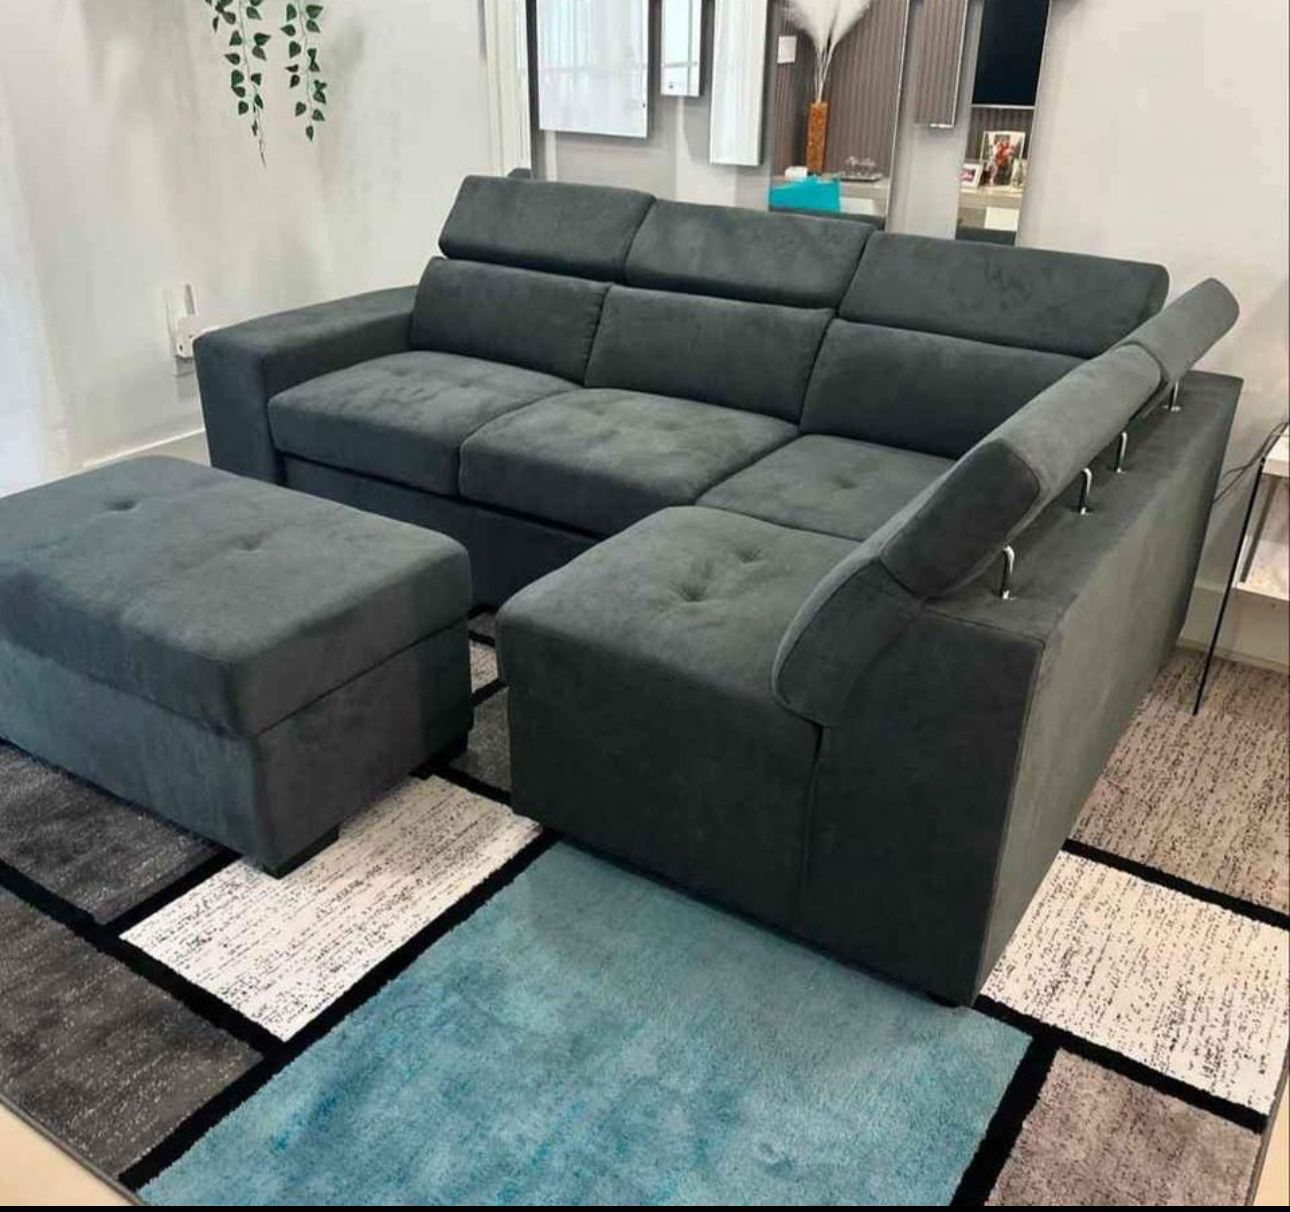 Brand new sectional in box- shop now pay later $49 down. ❗️PRICE DROP❗️ 